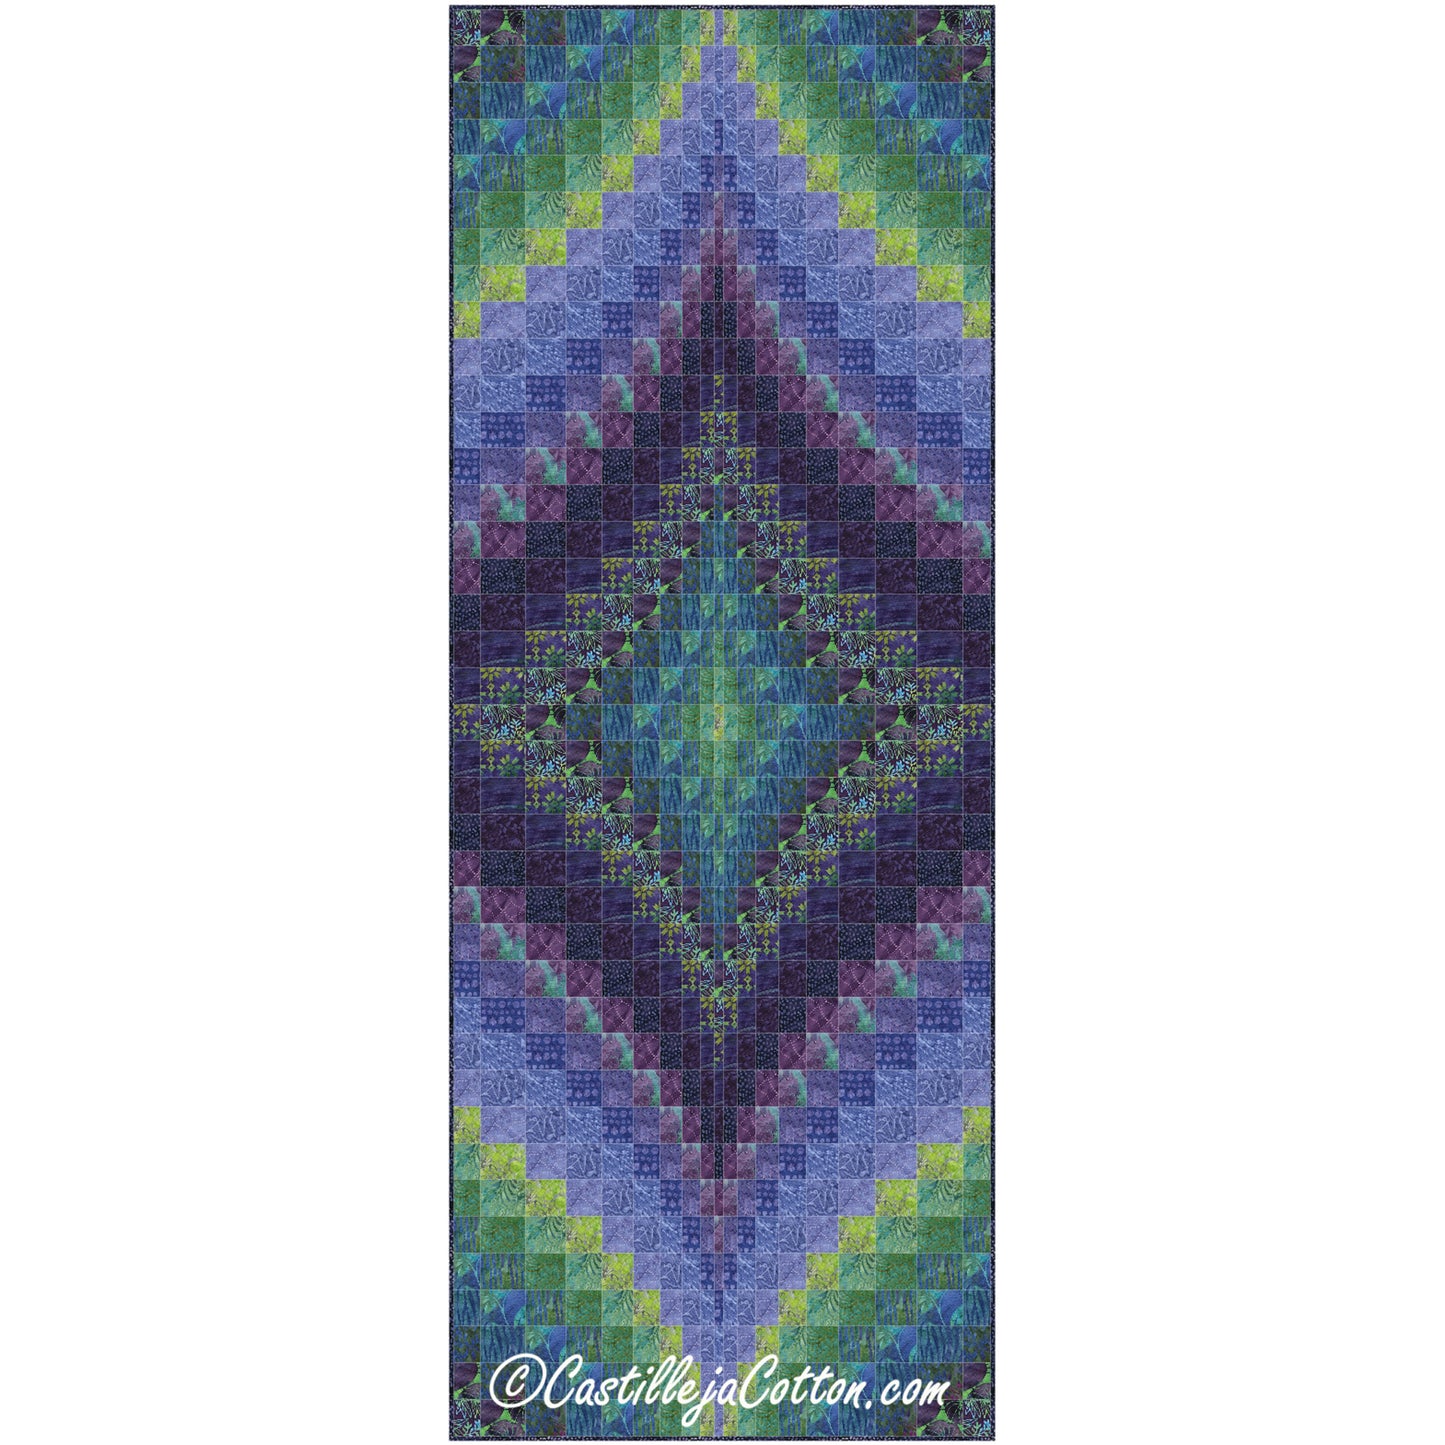 Colorful purples quilted table runner or wall hanging with a central star or Bargello design.